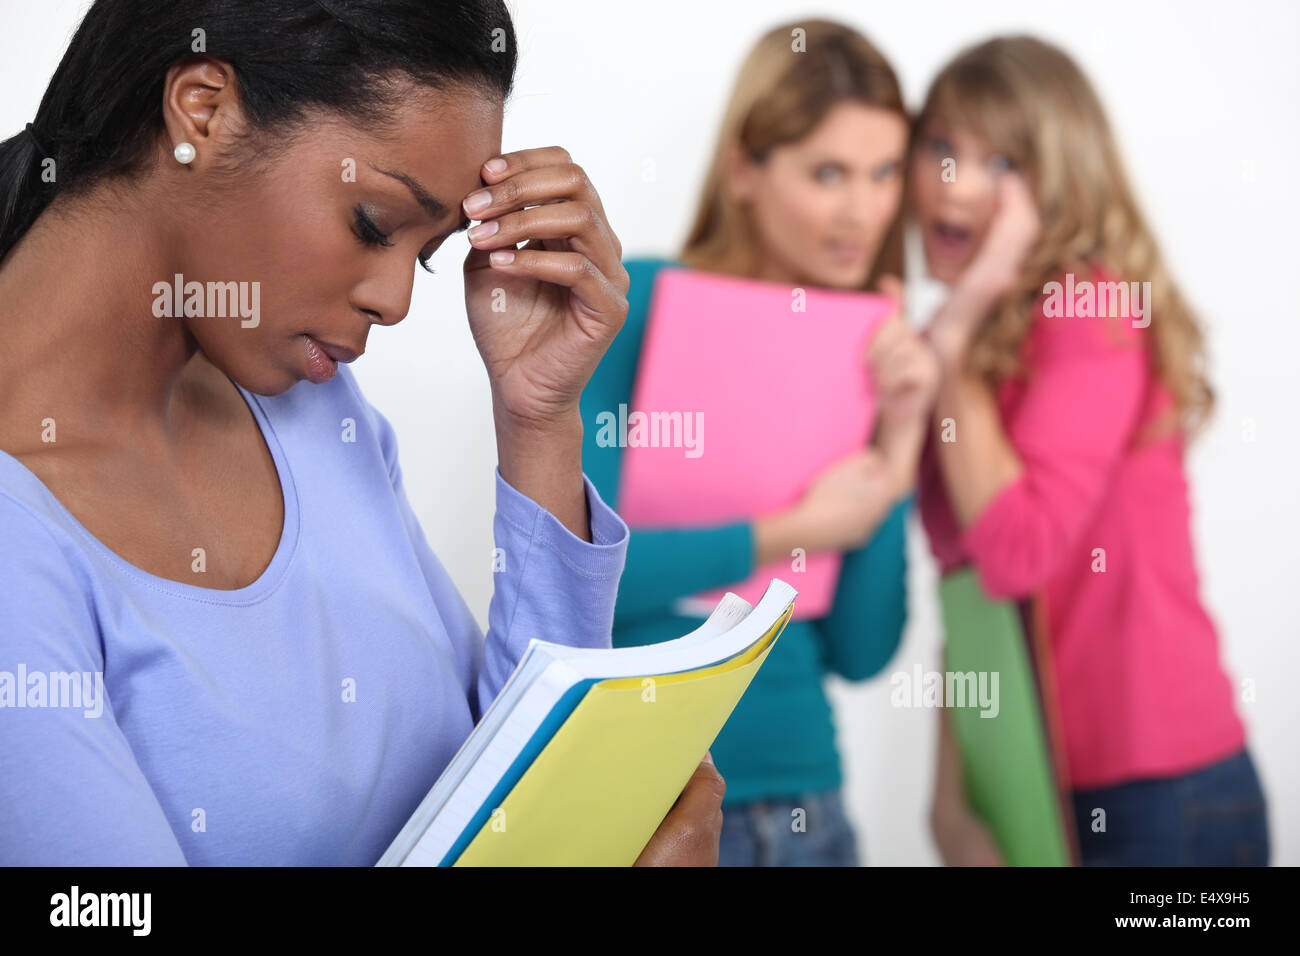 Sad student excluded by friends Stock Photo